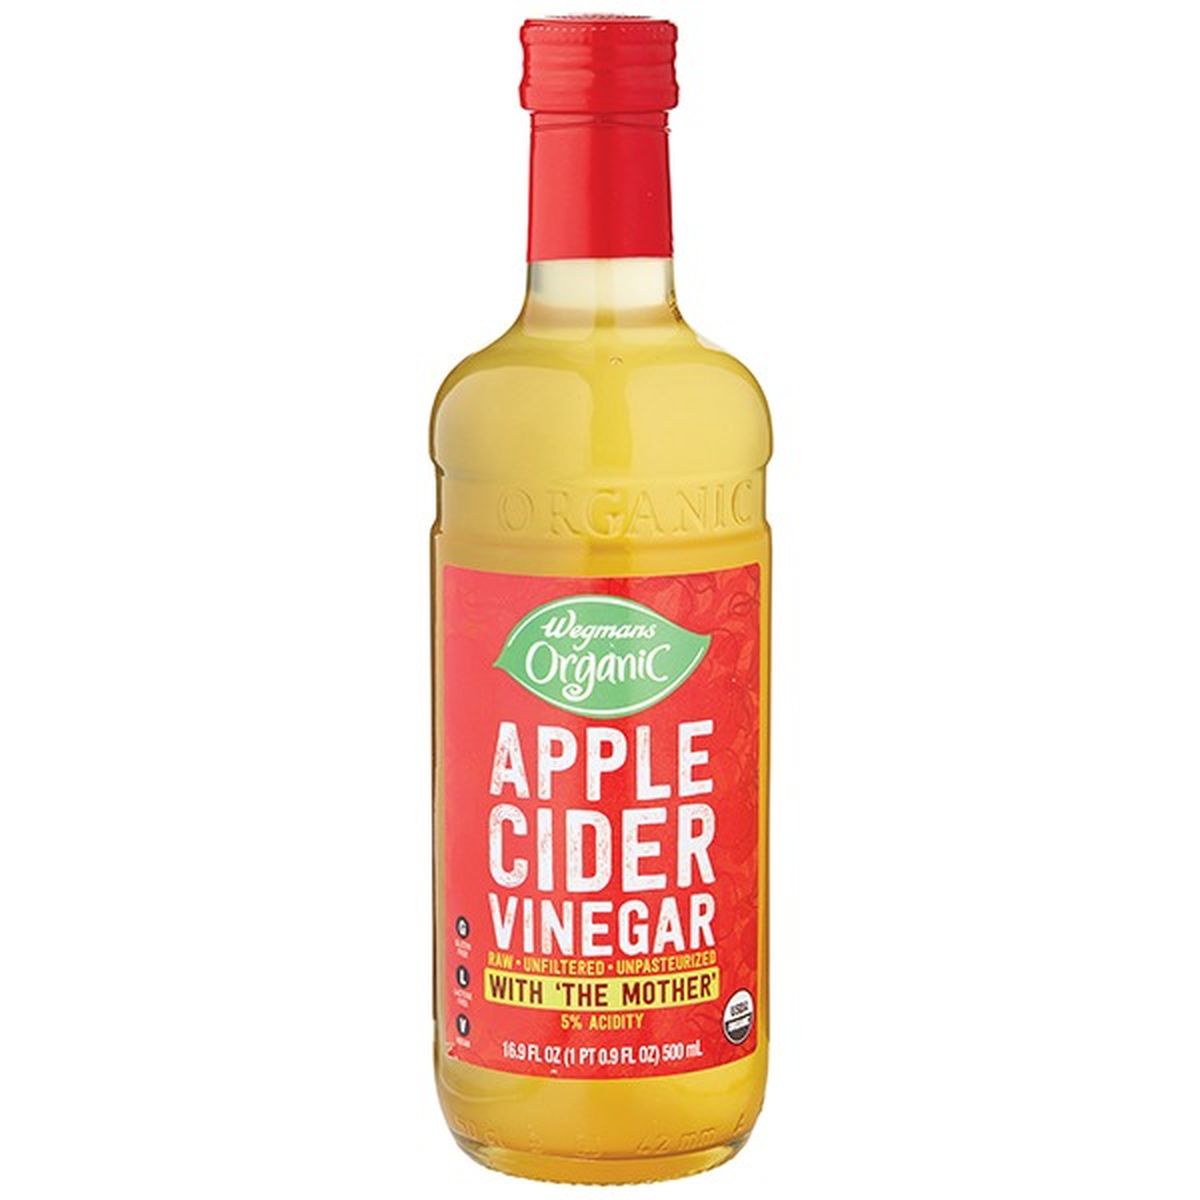 Calories in Wegmans Organic Apple Cider Vinegar with The Mother